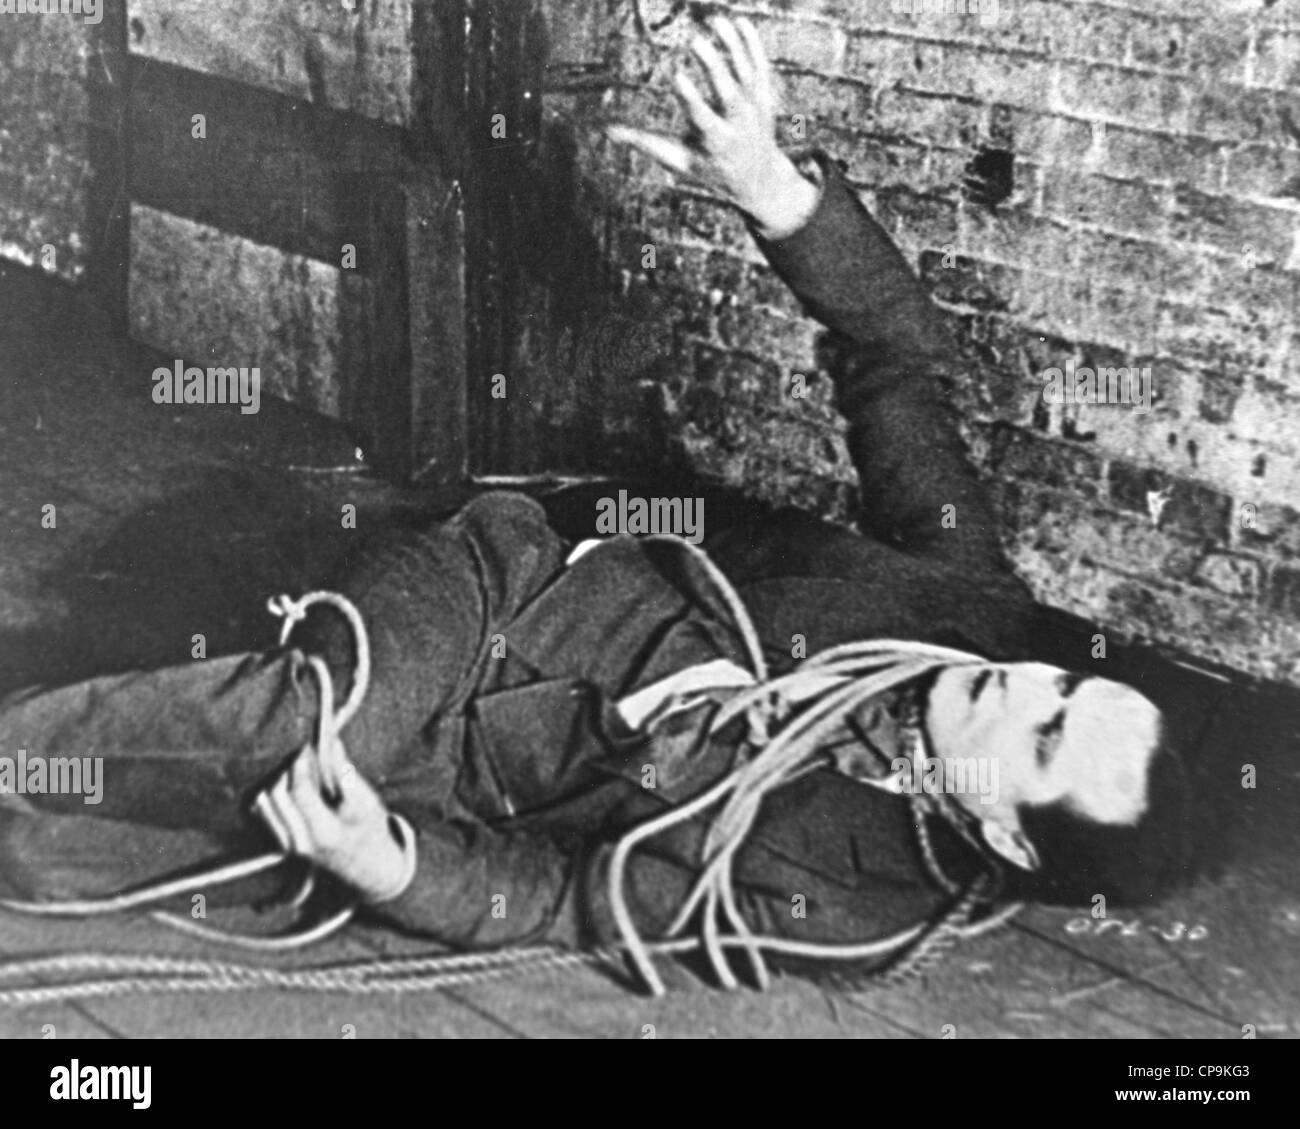 HARRY HOUDINI (1874-1926) Hungarian-American escapologist Banque D'Images